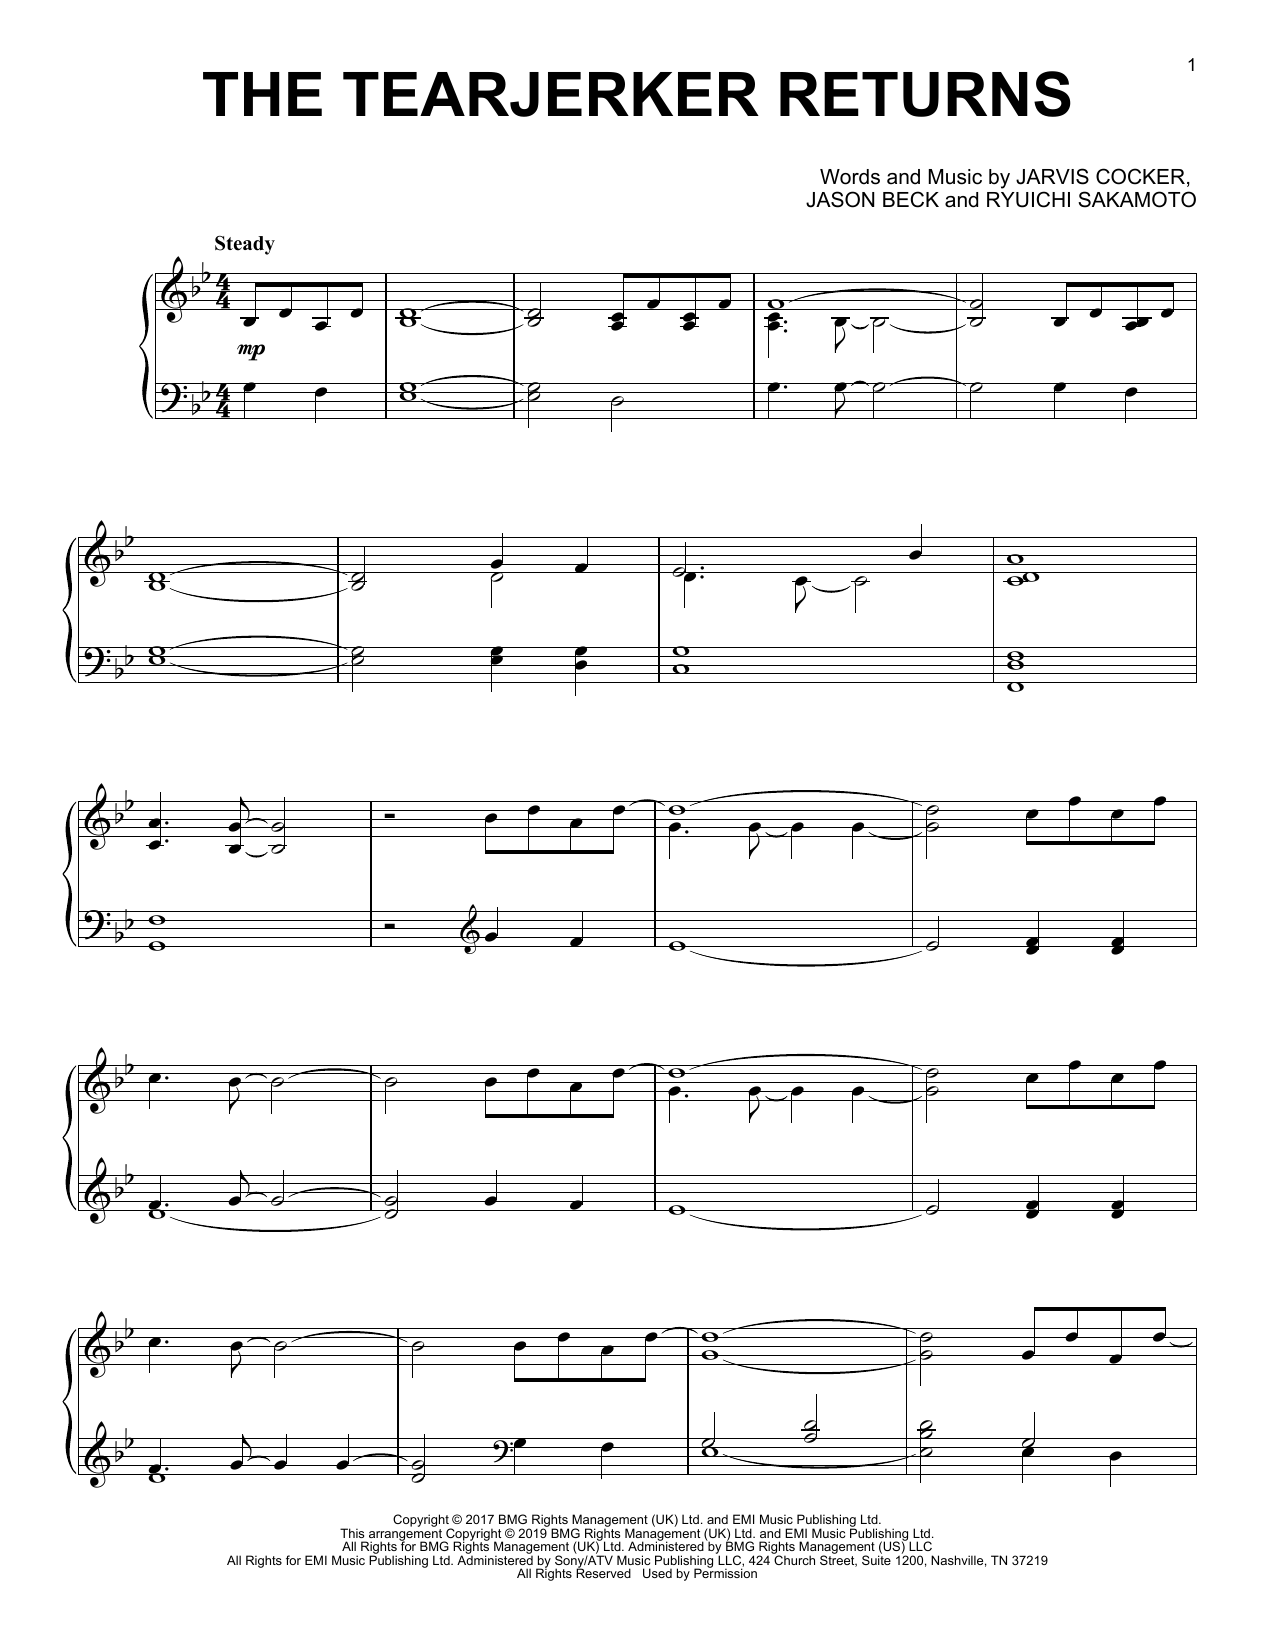 Download Jarvis Cocker & Chilly Gonzales The Tearjerker Returns Sheet Music